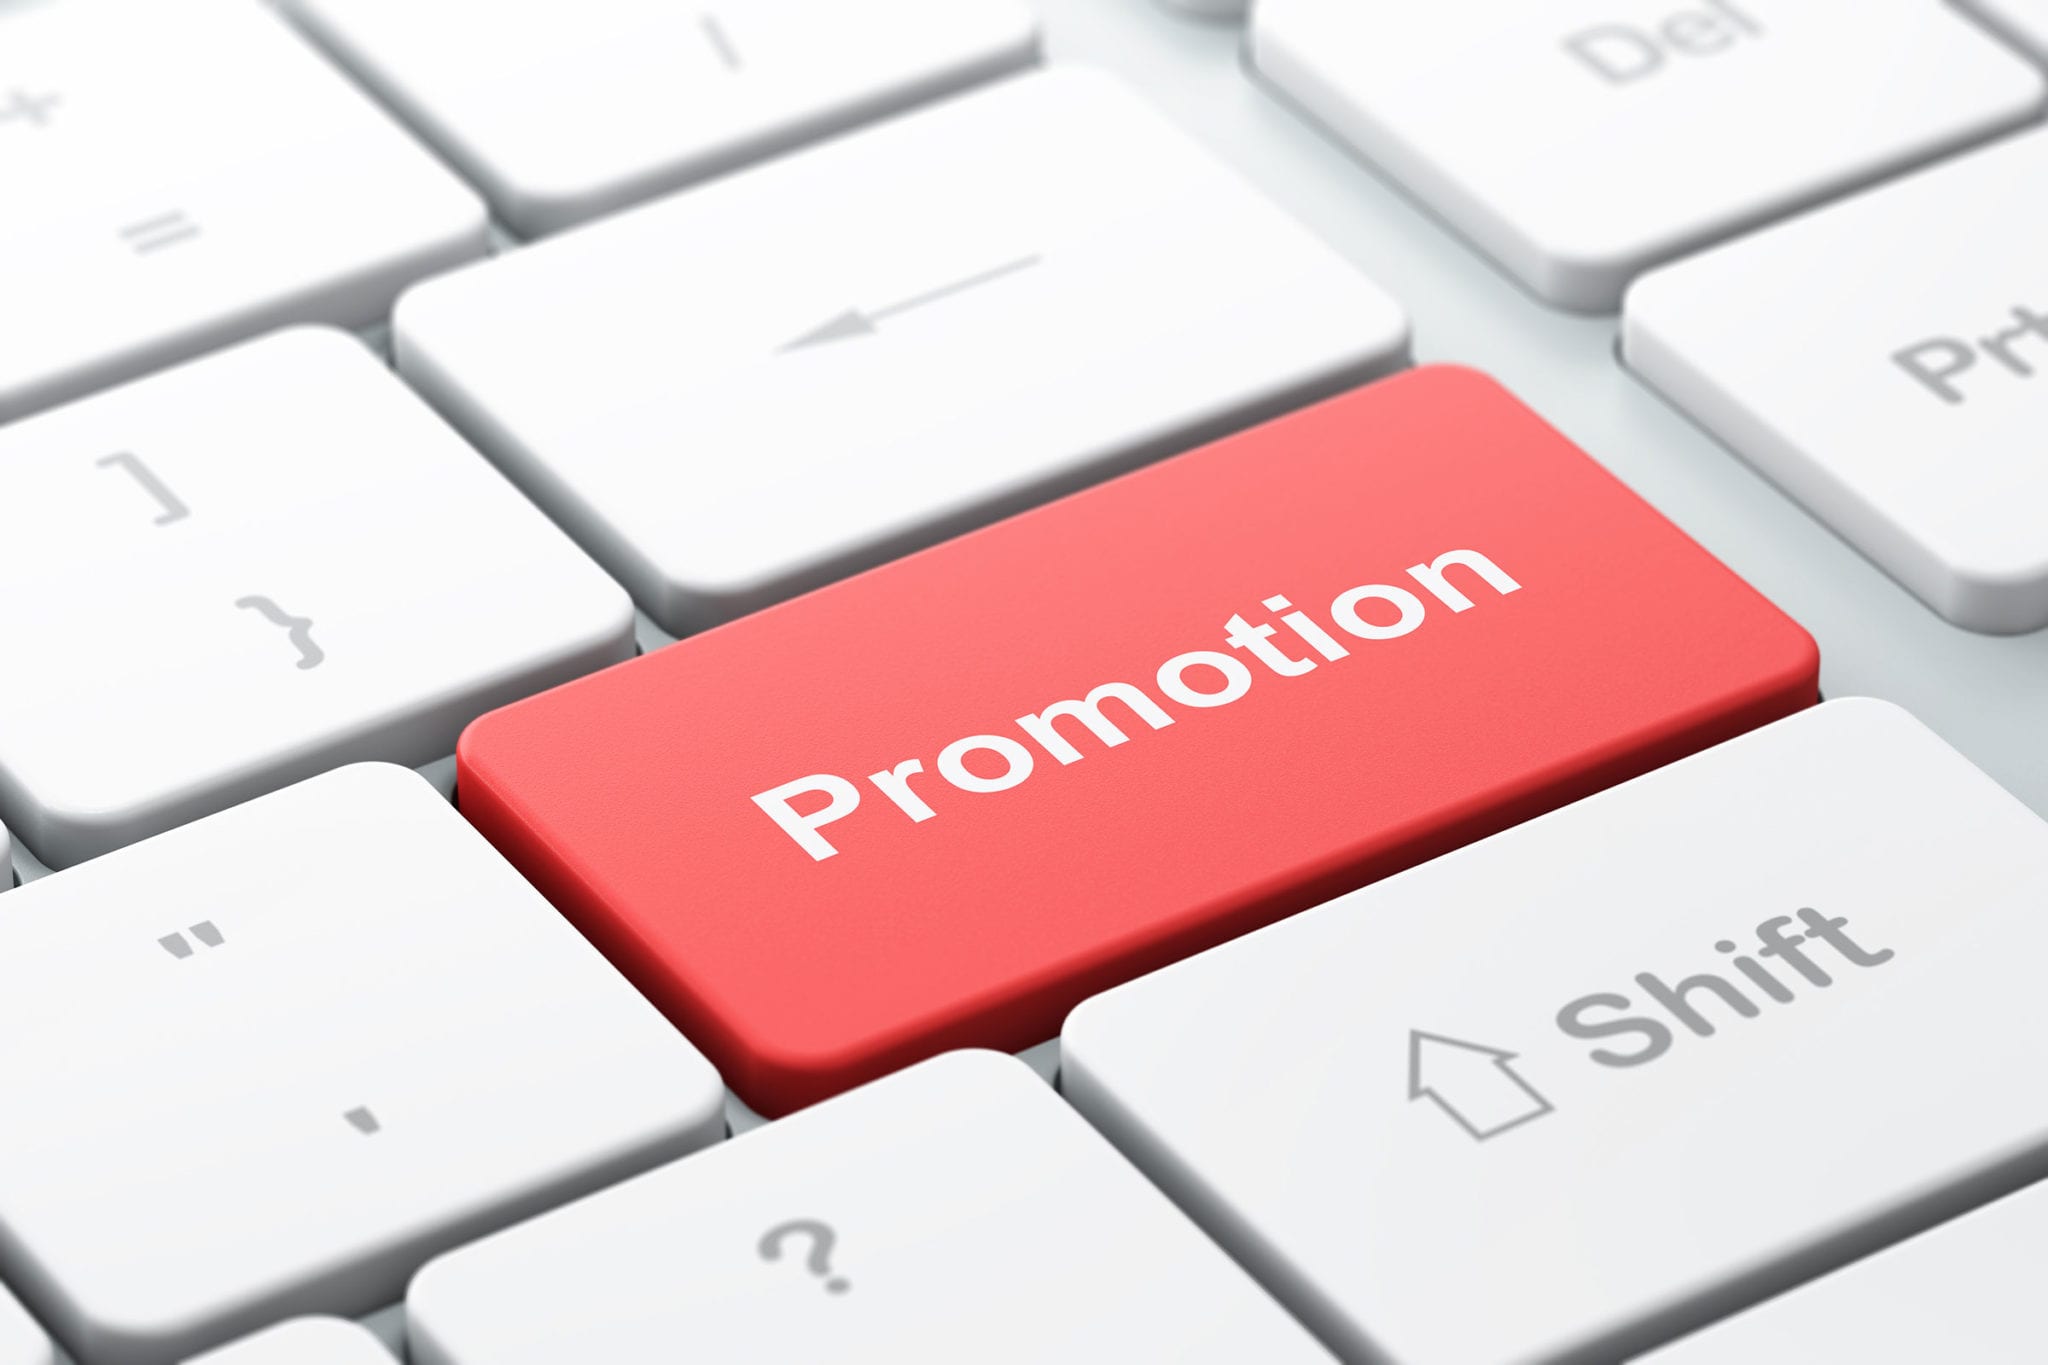 Promotion in the Marketing Mix